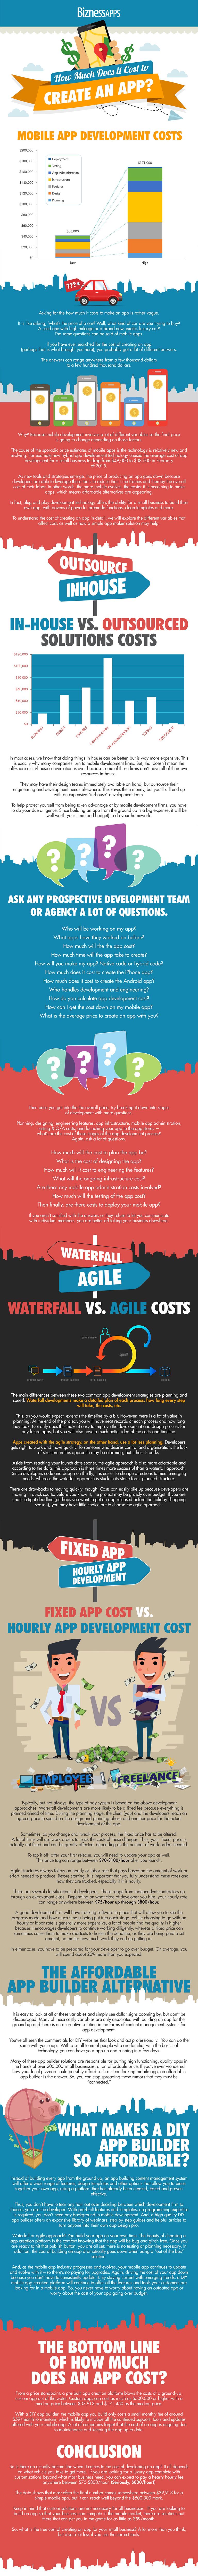 How Much it Cost to Develop an App Infographic